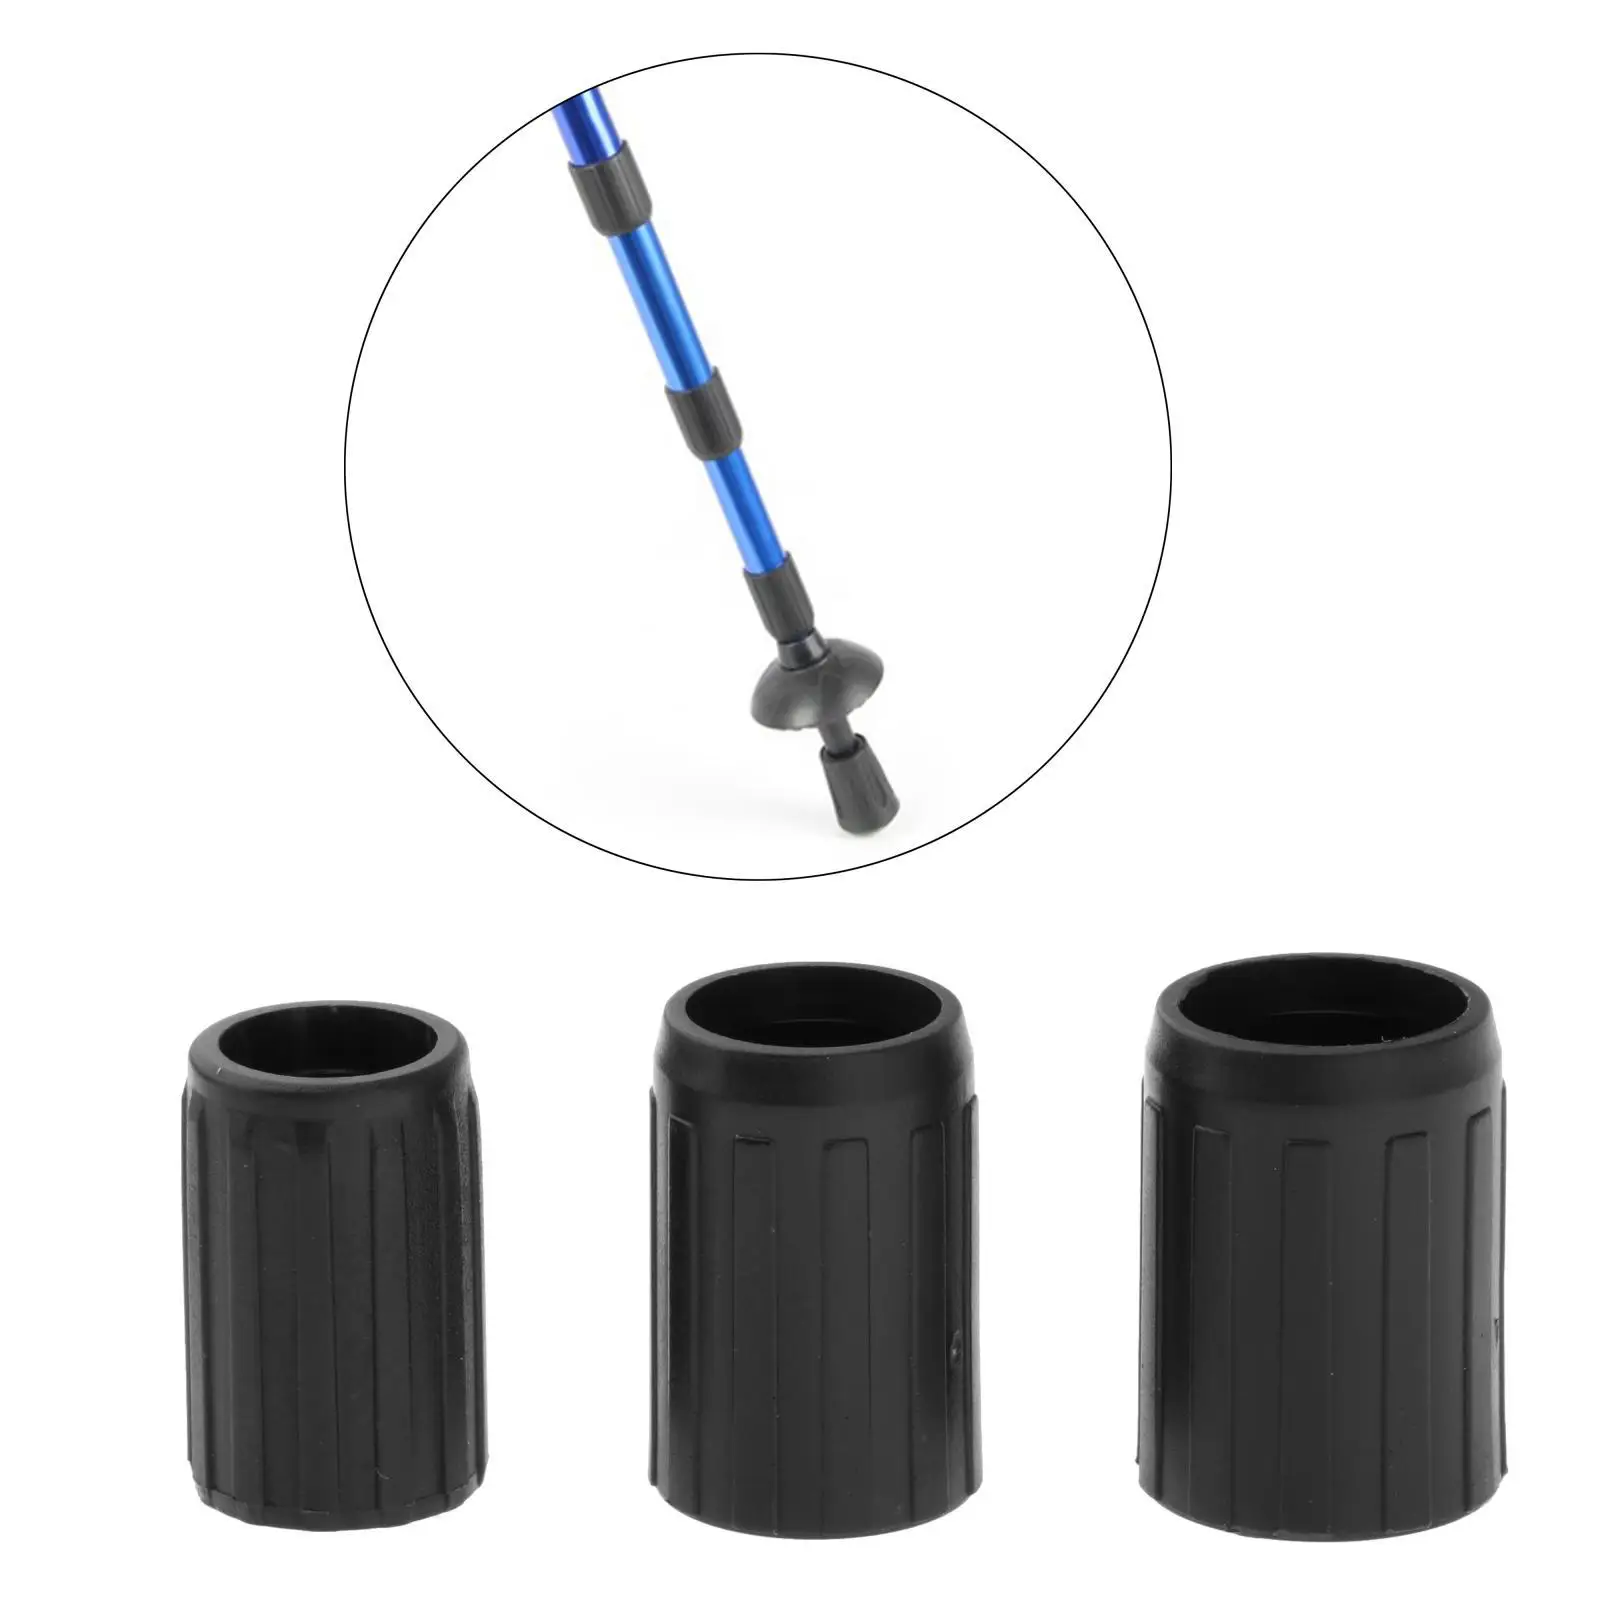 Trekking Pole Tip Replacement Rubber Feet for Nordic Walking Poles Mountaineering Outdoor Camping Mountain Climbing Equipment